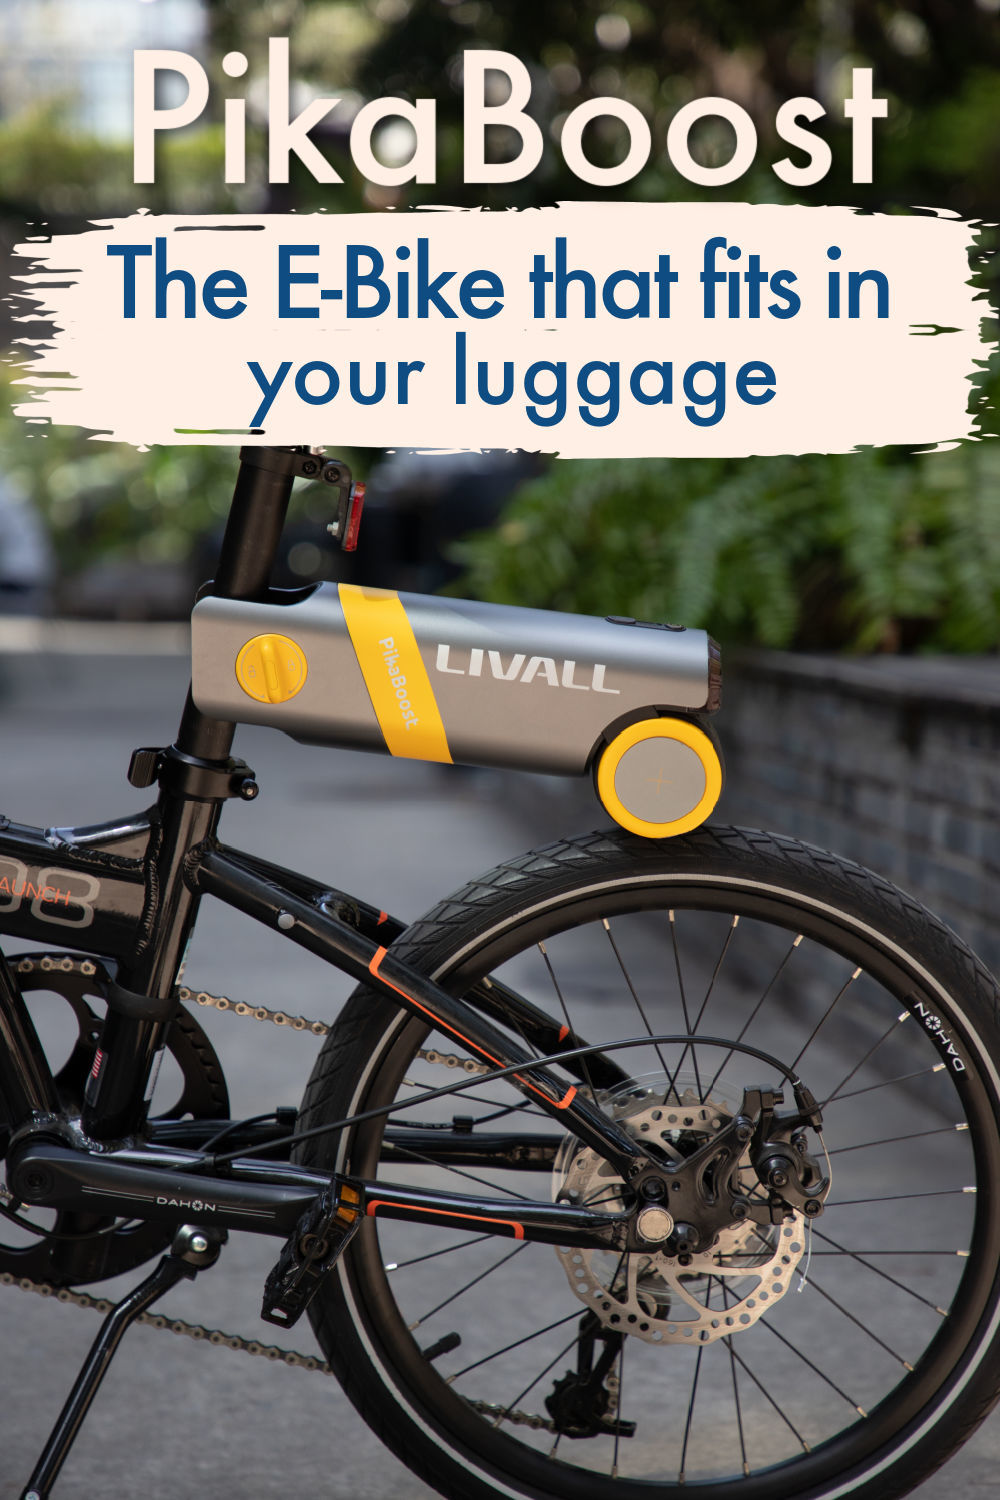 Imagine being able to carry your e-bike with you wherever you go on your travels. It would be a game-changer, right? With the all-new Livall PikaBoost, you can have your electric bike with you no matter where you are in the world.Here is an article with all the top features of the PikaBoost e-bike conversion kit and why you should (or not) own one yourself!